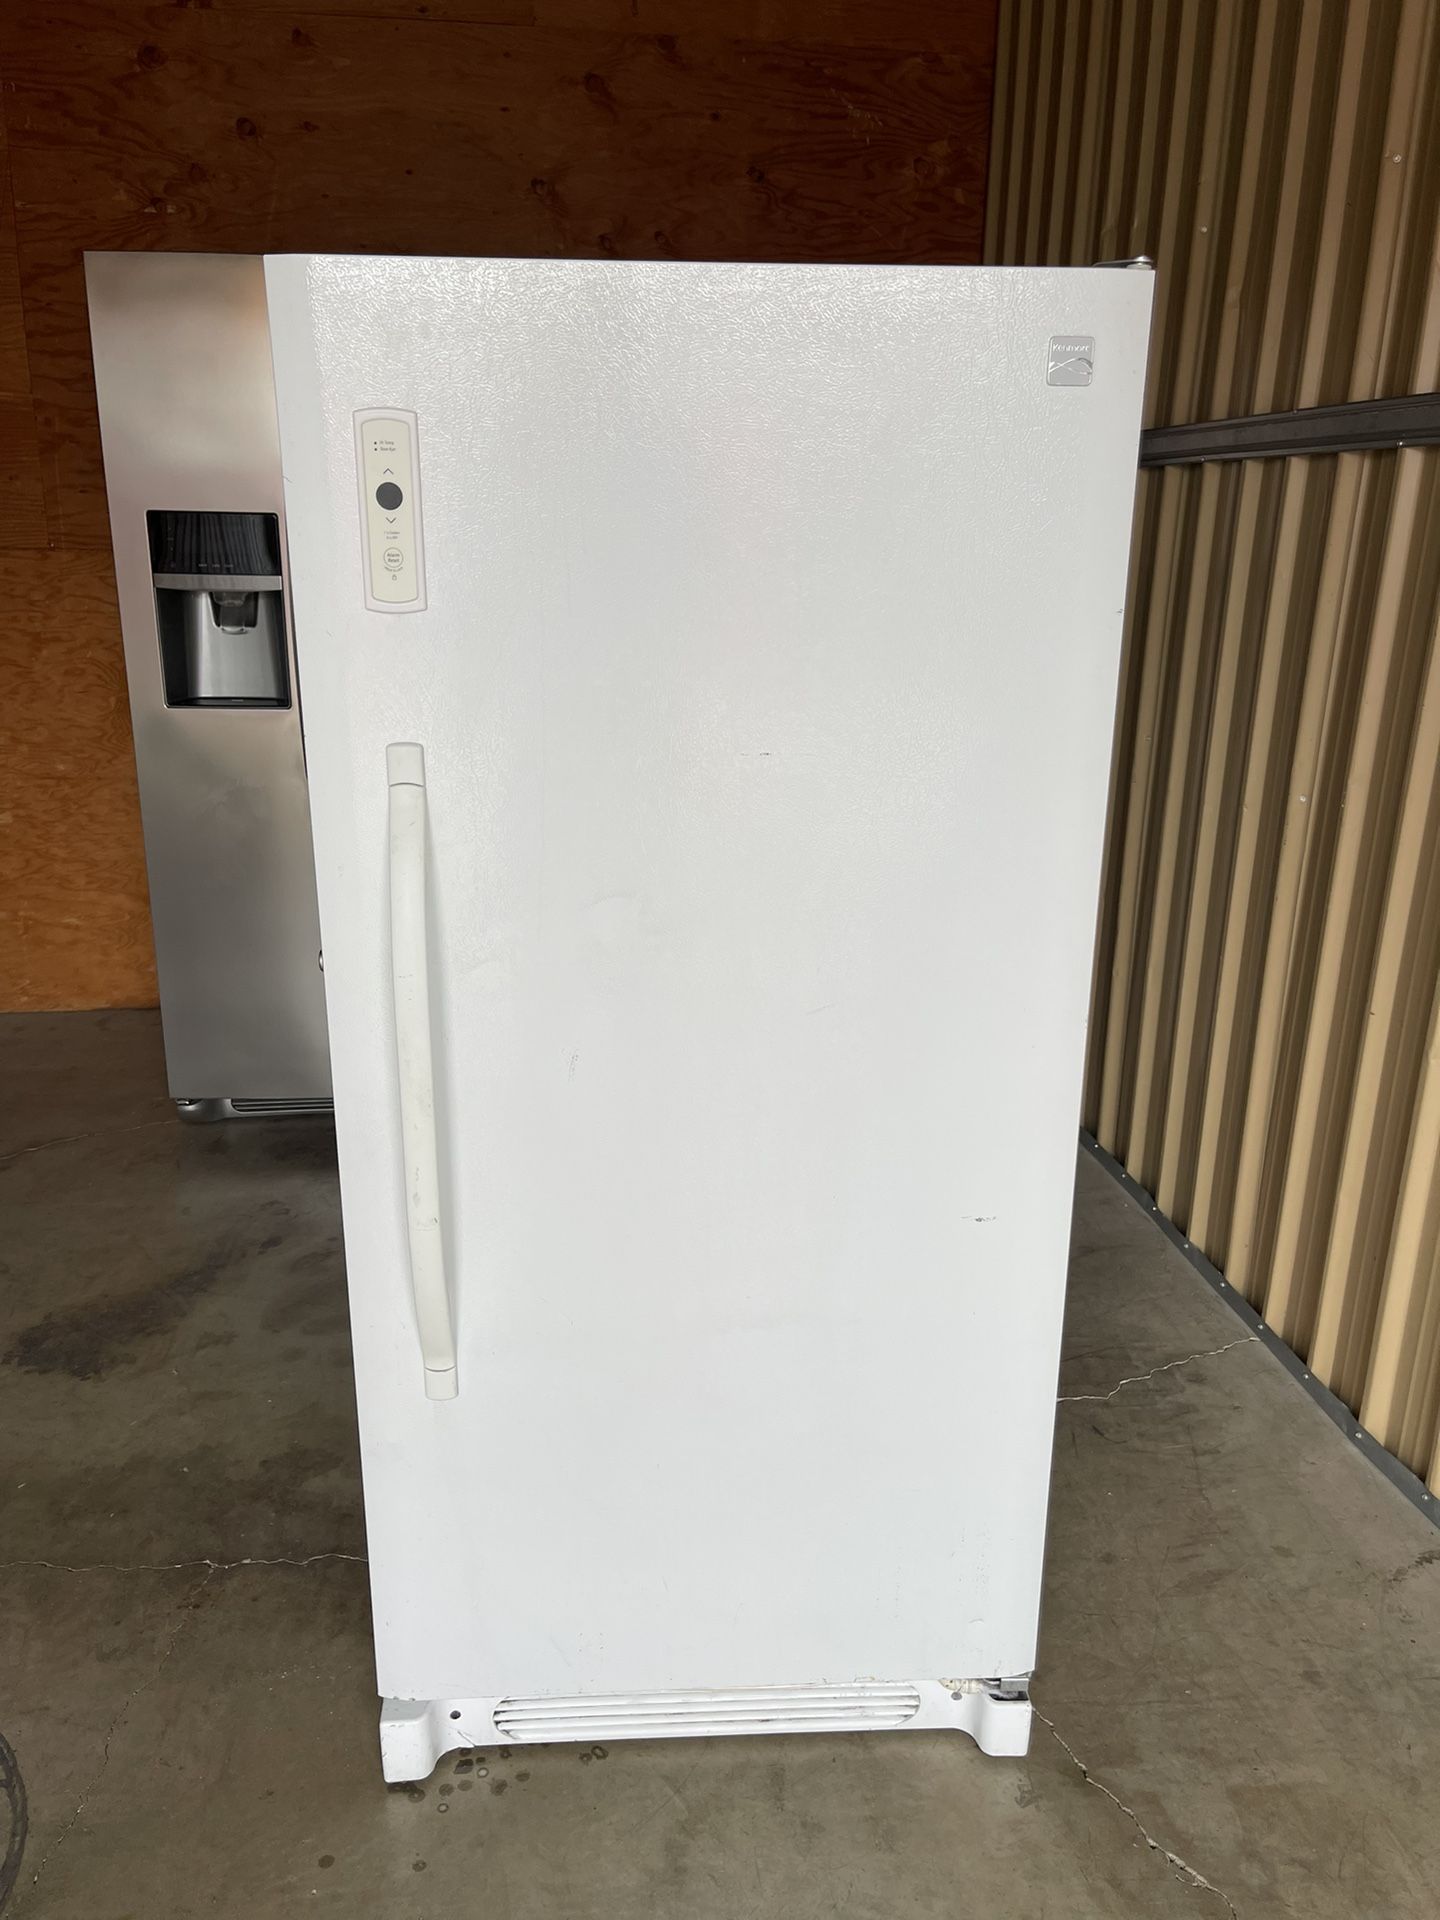 KENMORE WHITE FREEZER $ 300 OBO **** WORKS GREAT, 90  DAY WARRANTY, DELIVERY AVAILABLE 